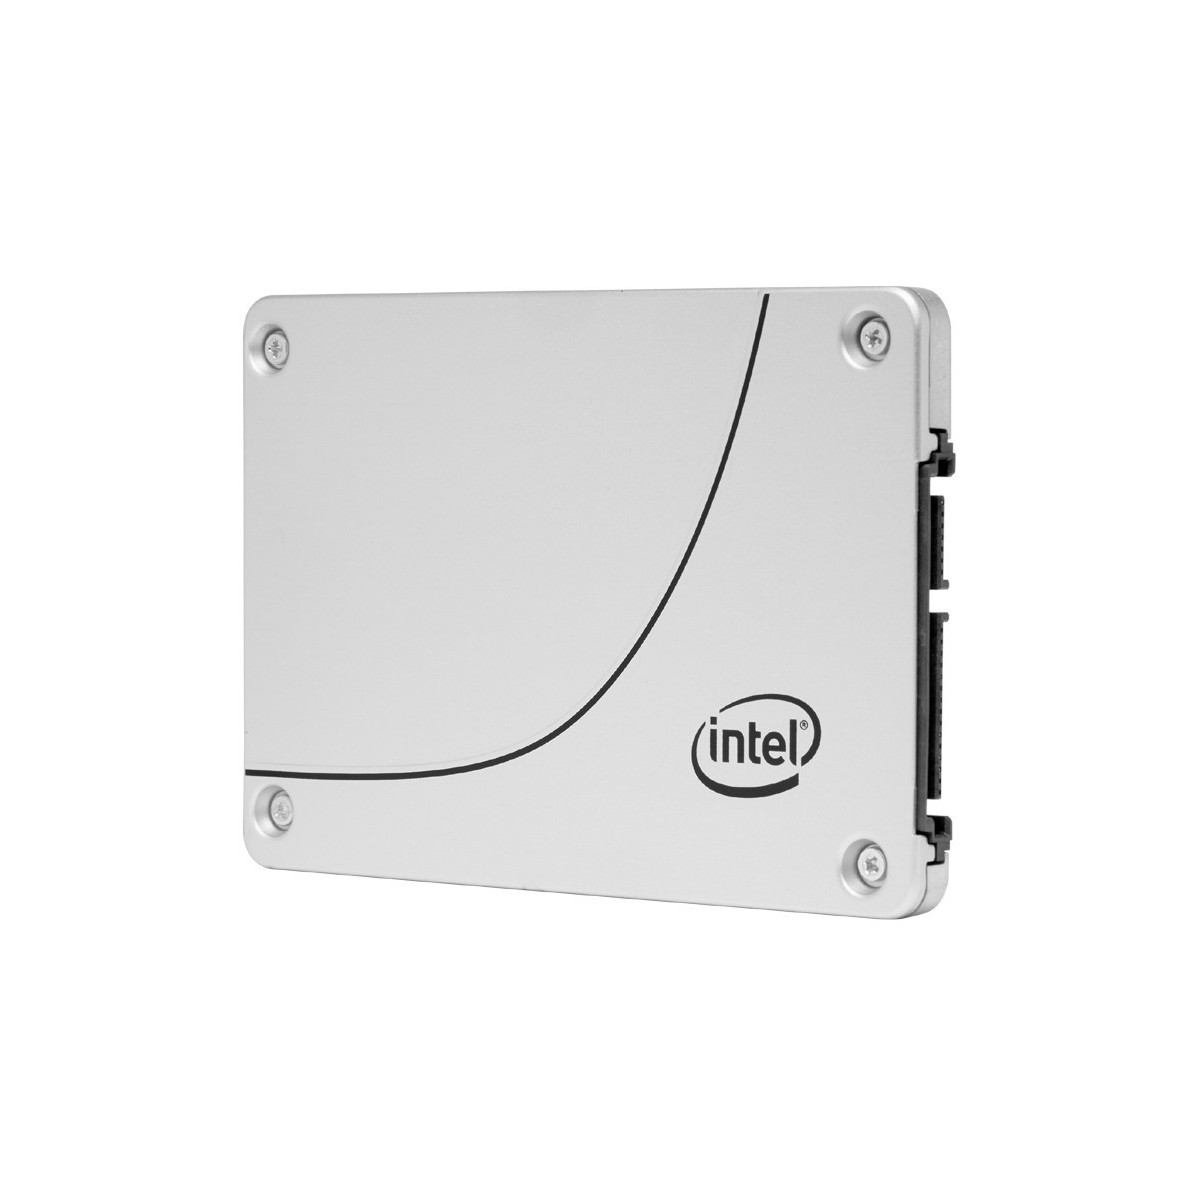 Intel Solid-State Drive DC S3520 Series 2.5 SATA 800 GB - Solid State Disk - Internal